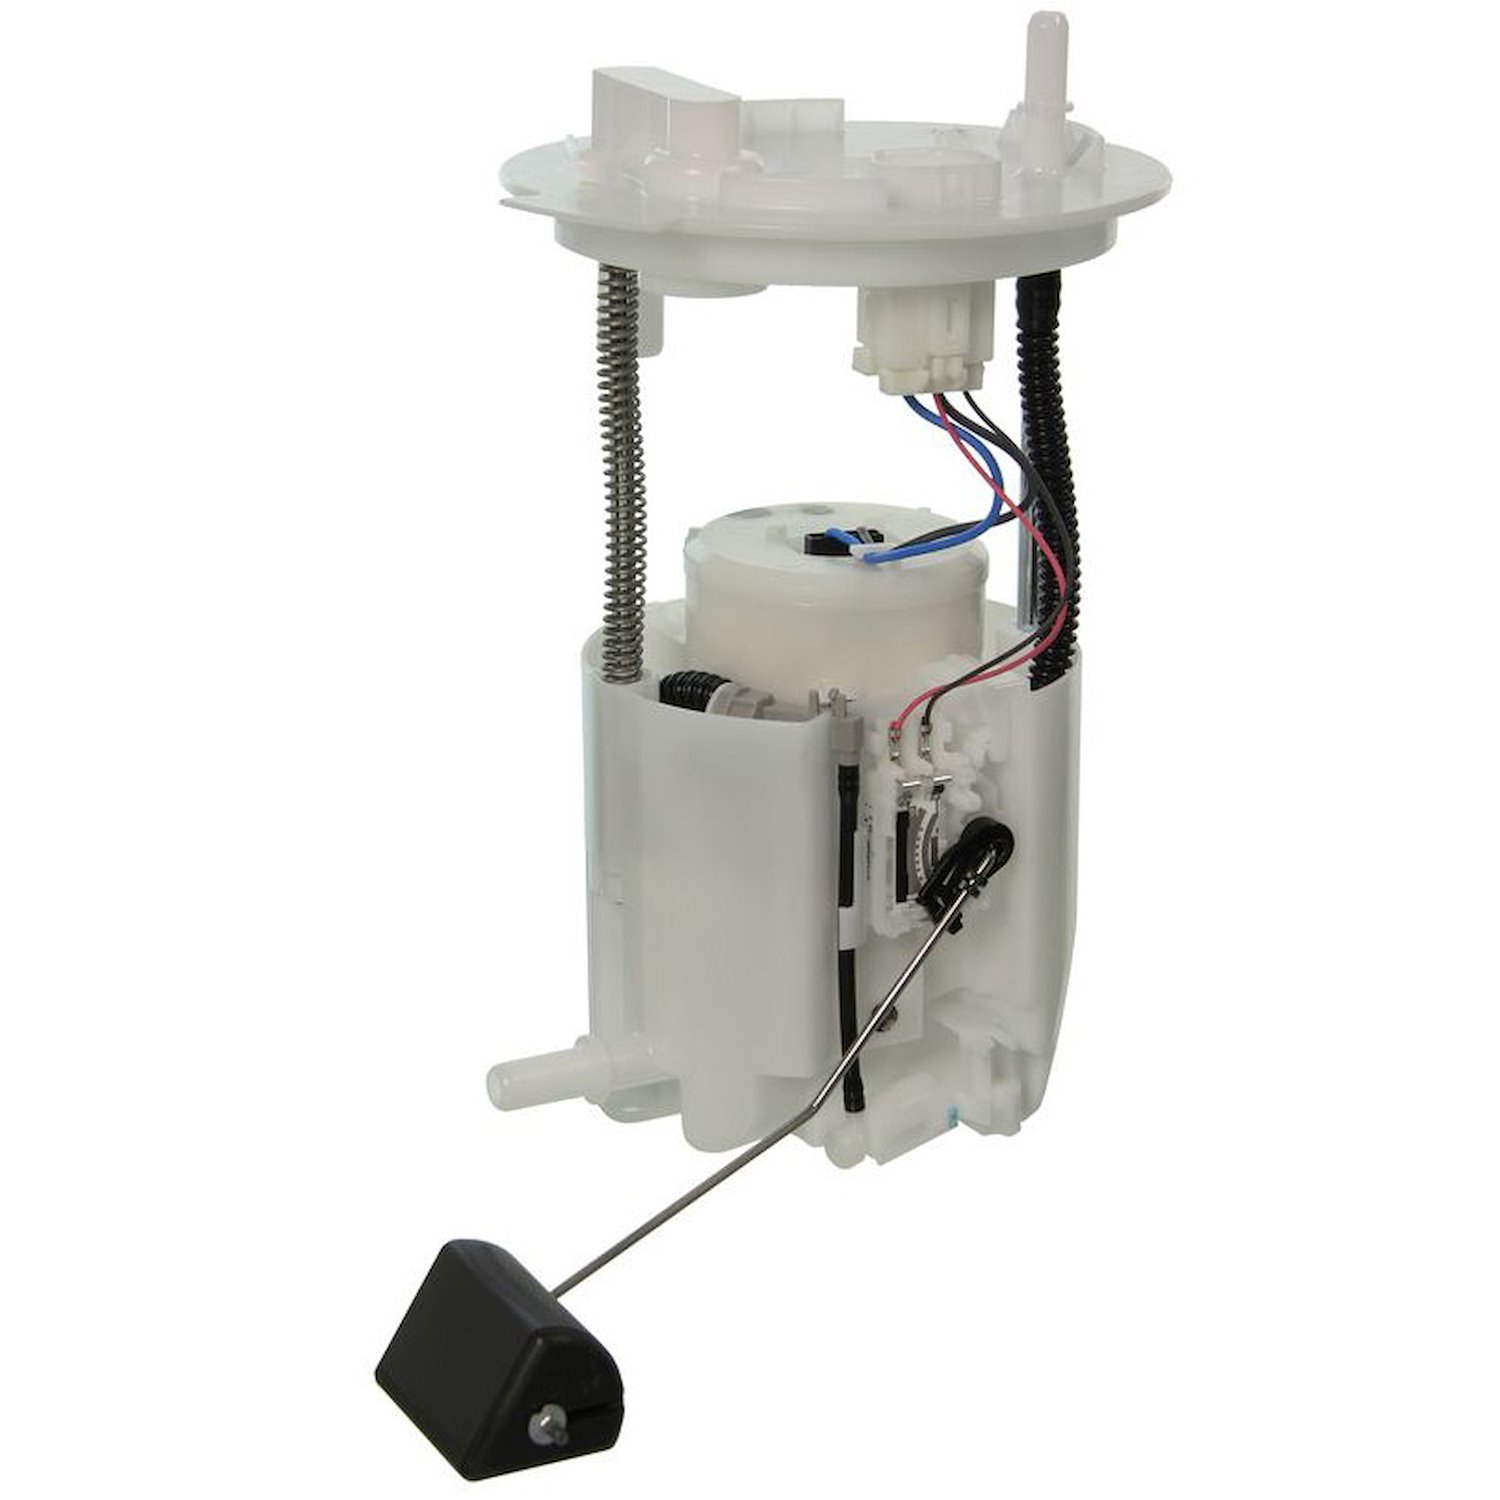 OE Ford Replacement Fuel Pump Module Assembly for 2009-2013 Ford E-150/2009-2014 Ford E-250/2009-2016 Ford E-350/E-450